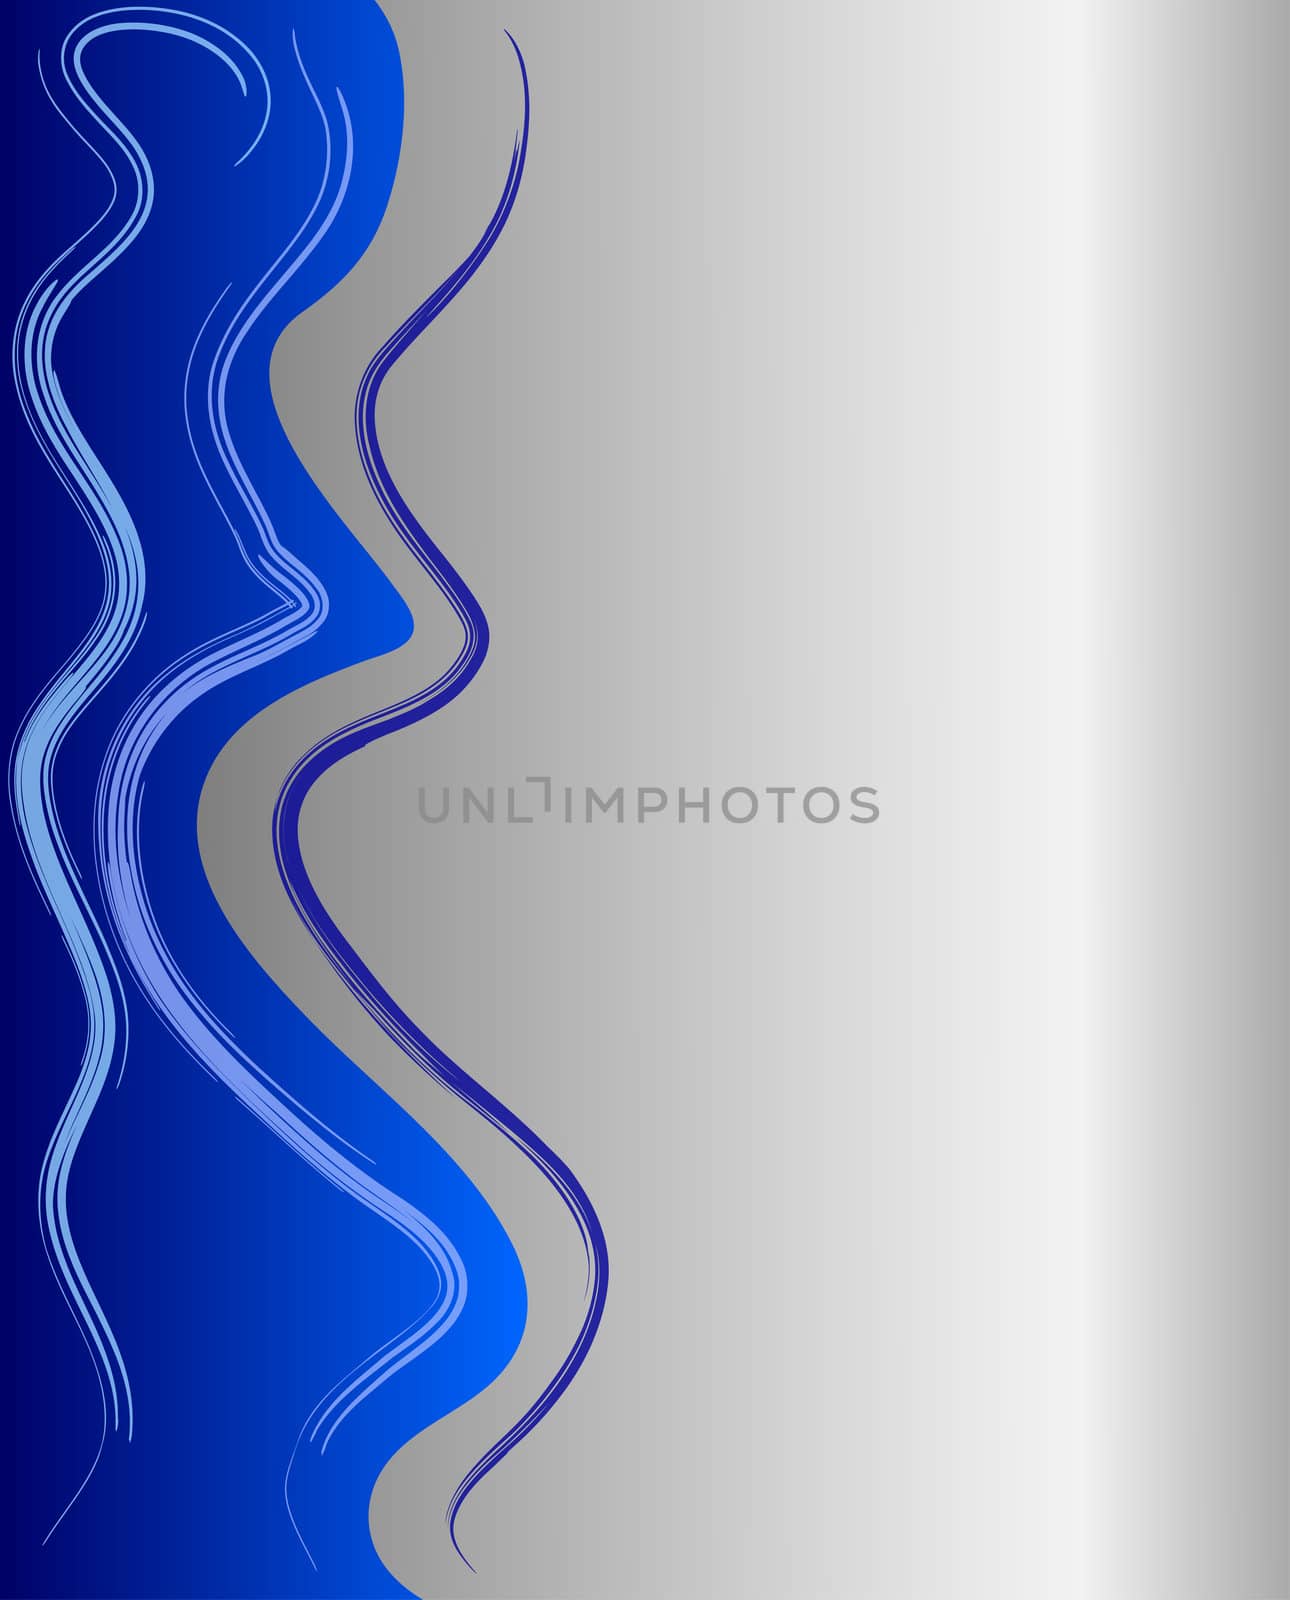 illustration of a silver abstract decoration background